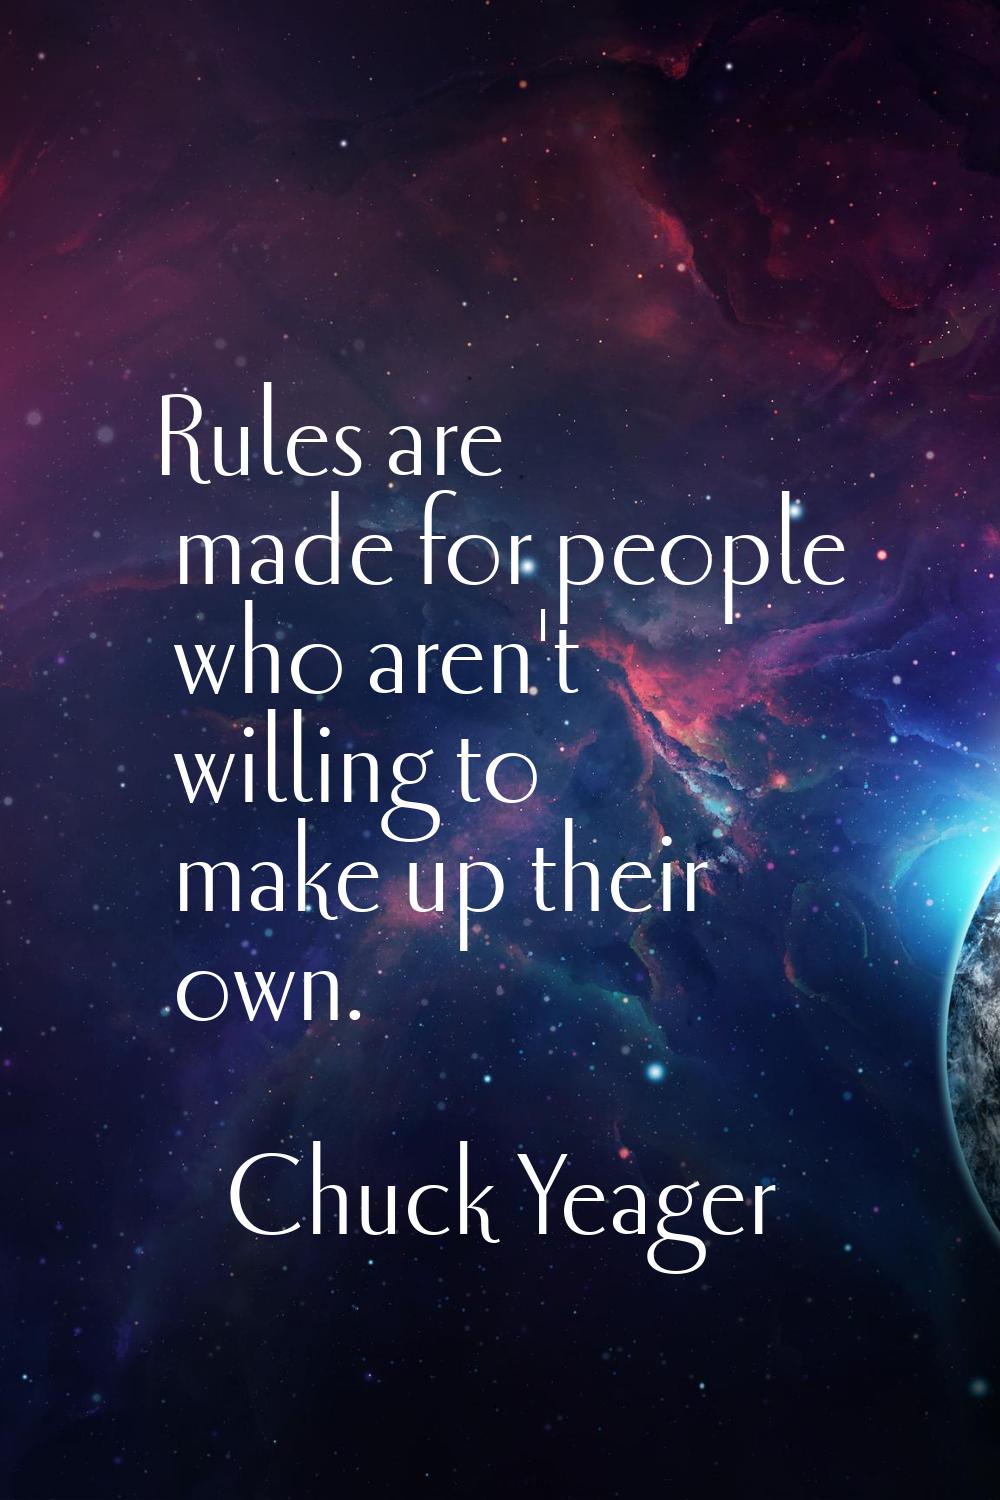 Rules are made for people who aren't willing to make up their own.